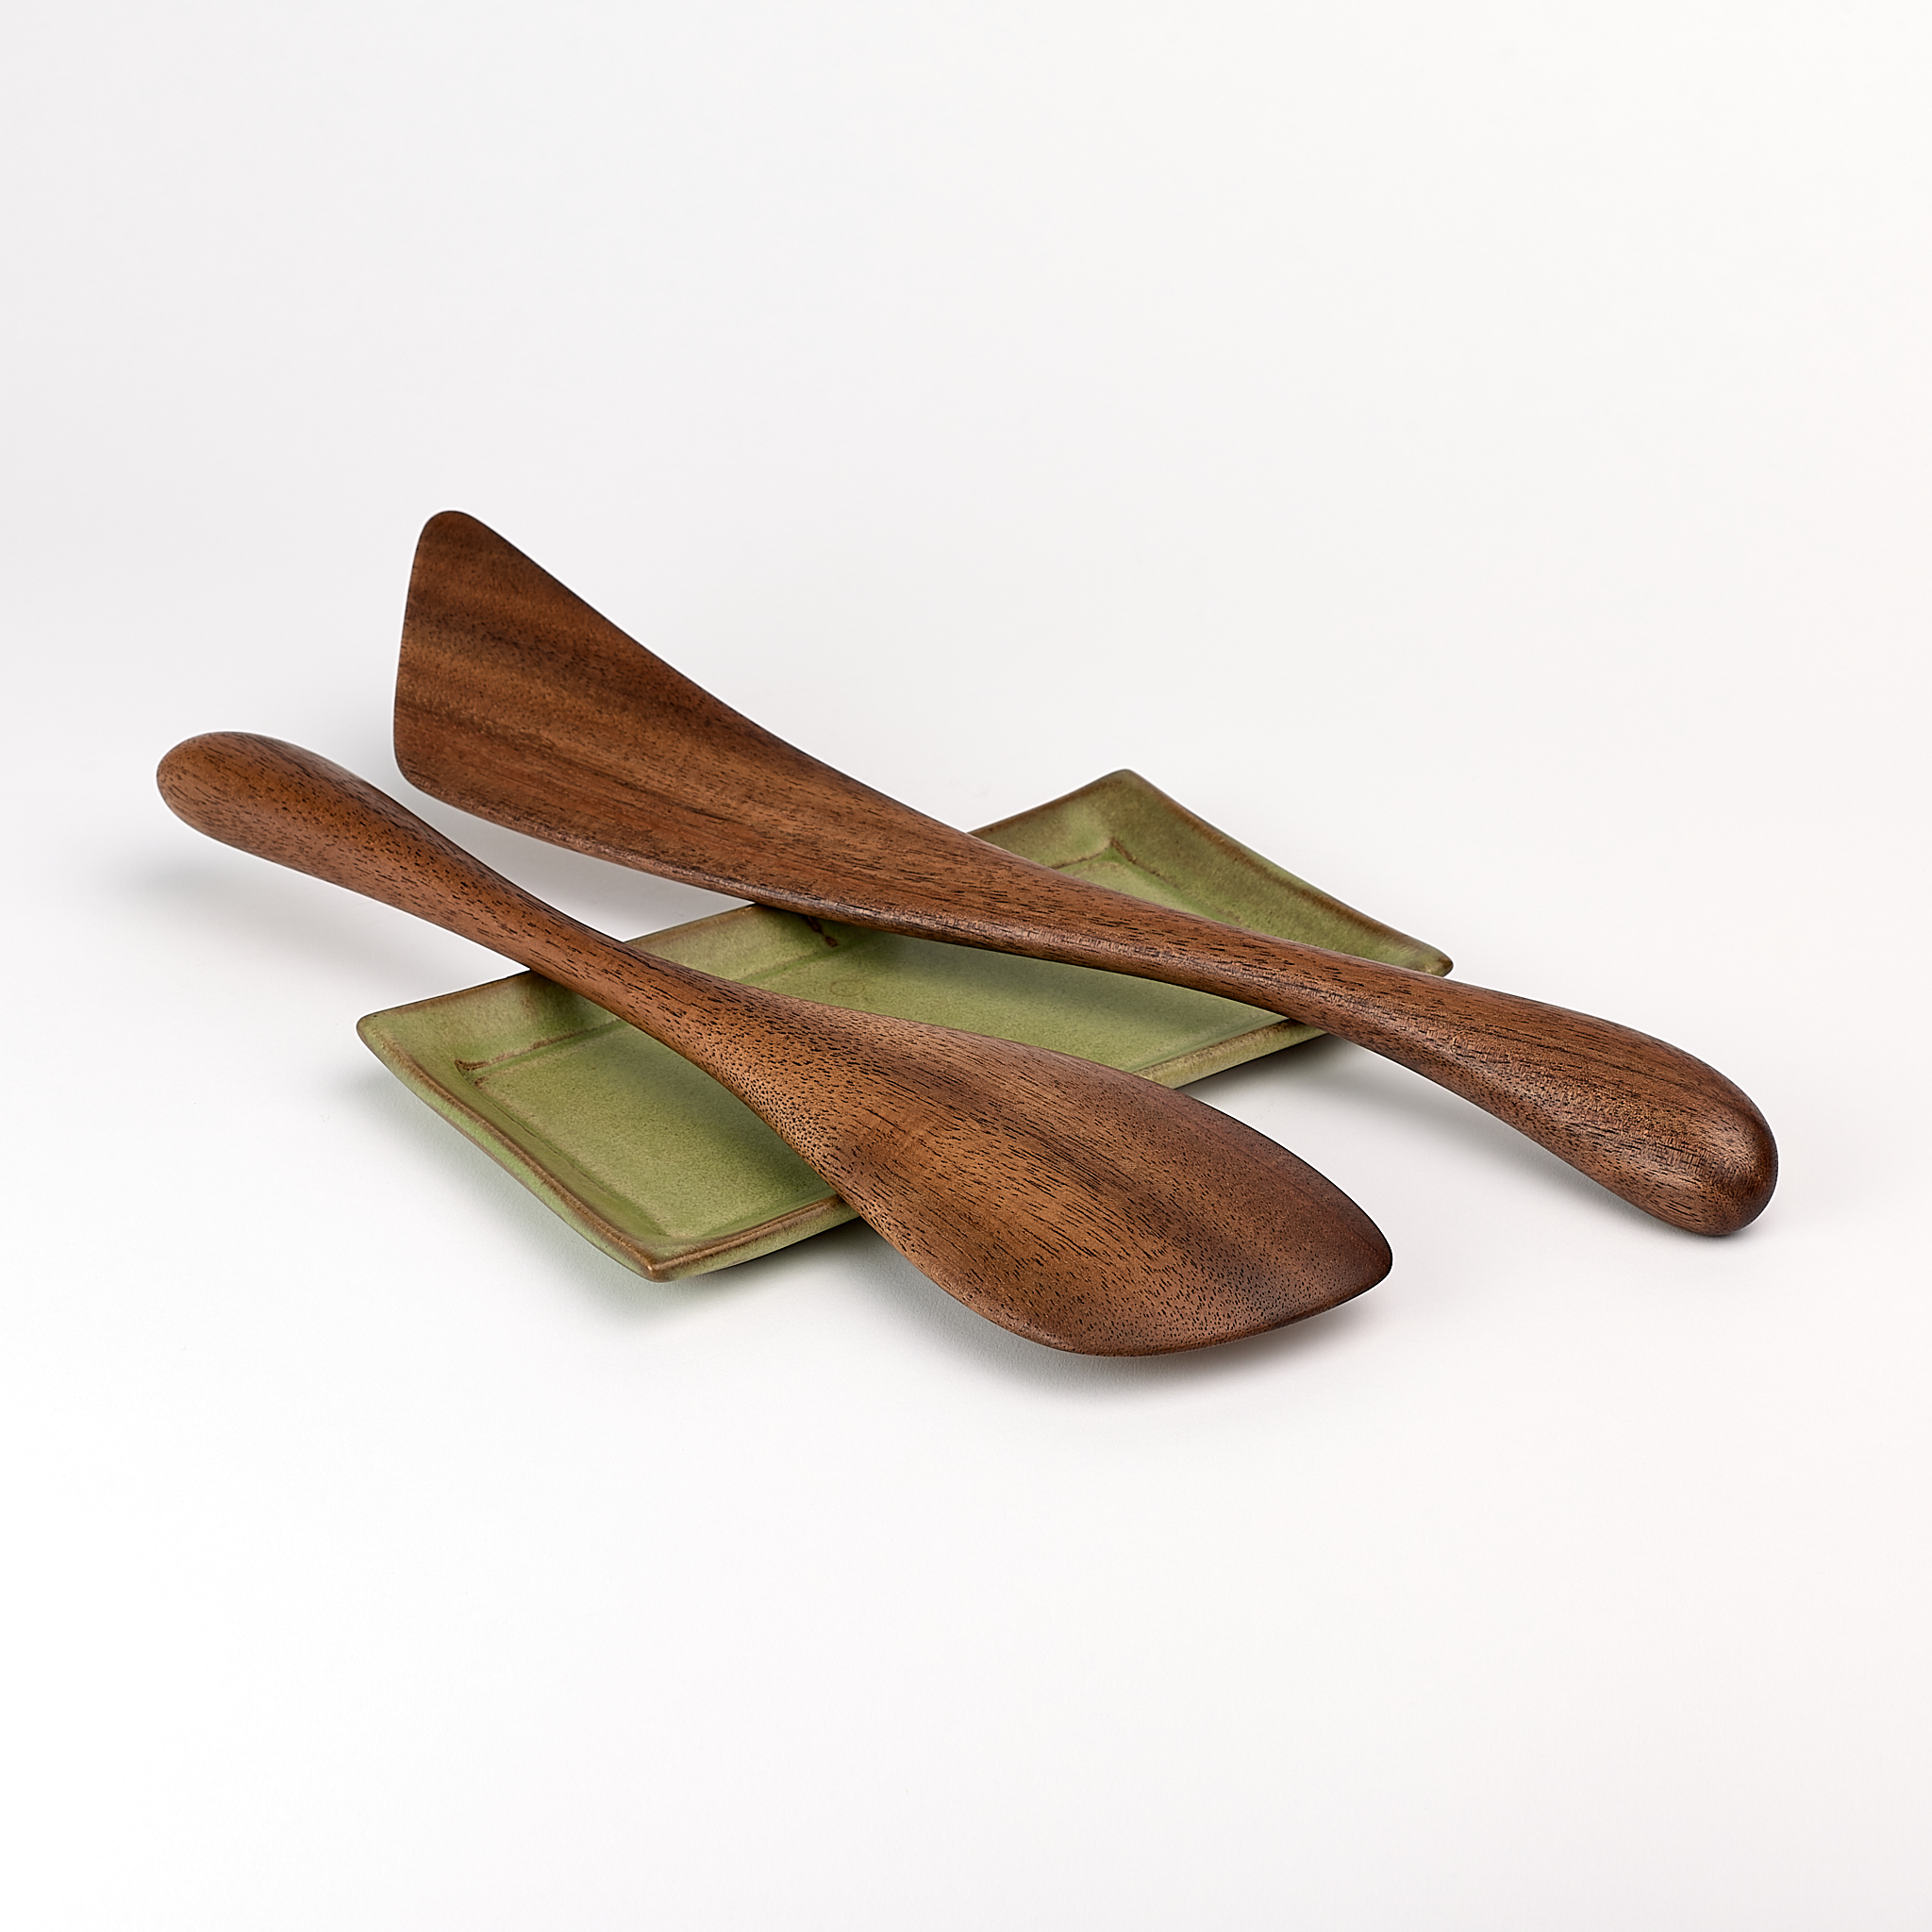 best selling kitchen utensils - The Classic Stirrer and Traditional Spatula - by Bob Gilmour, Gilmour Design, Australia